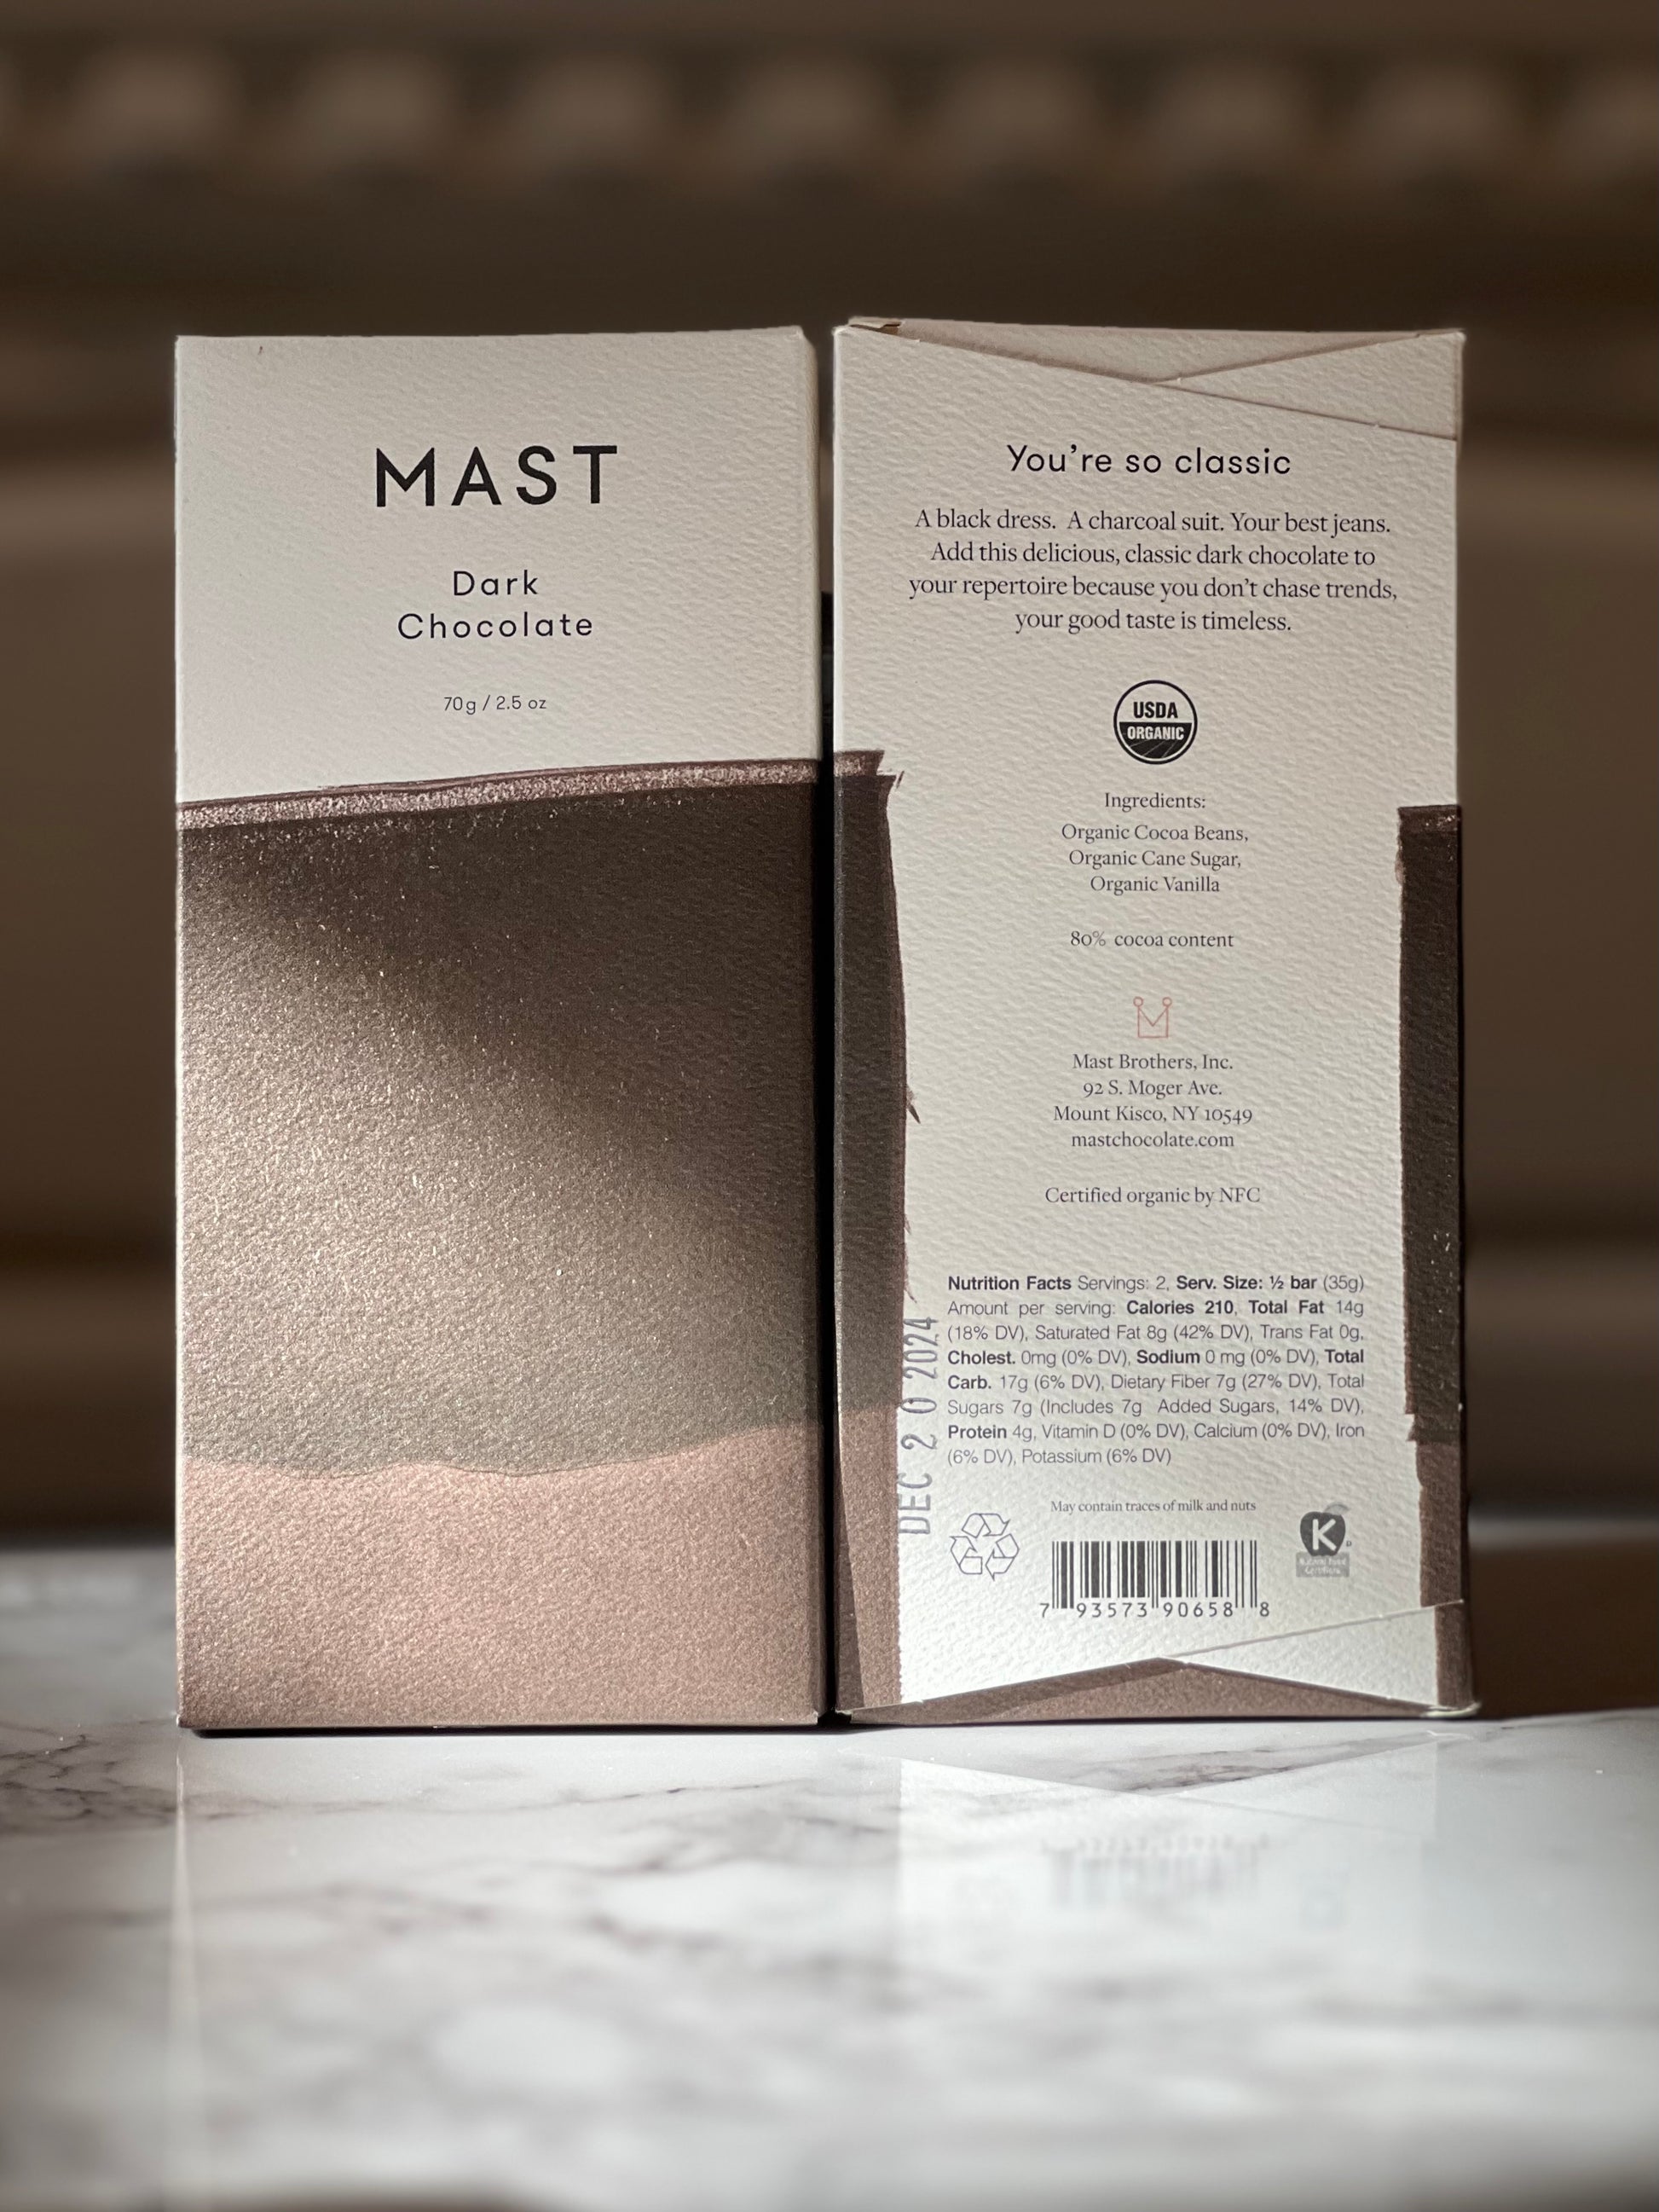 Mast Brother's Dark Chocolate bar. USDA Organic and the perfect pairing/snack for an awesome bourbon.